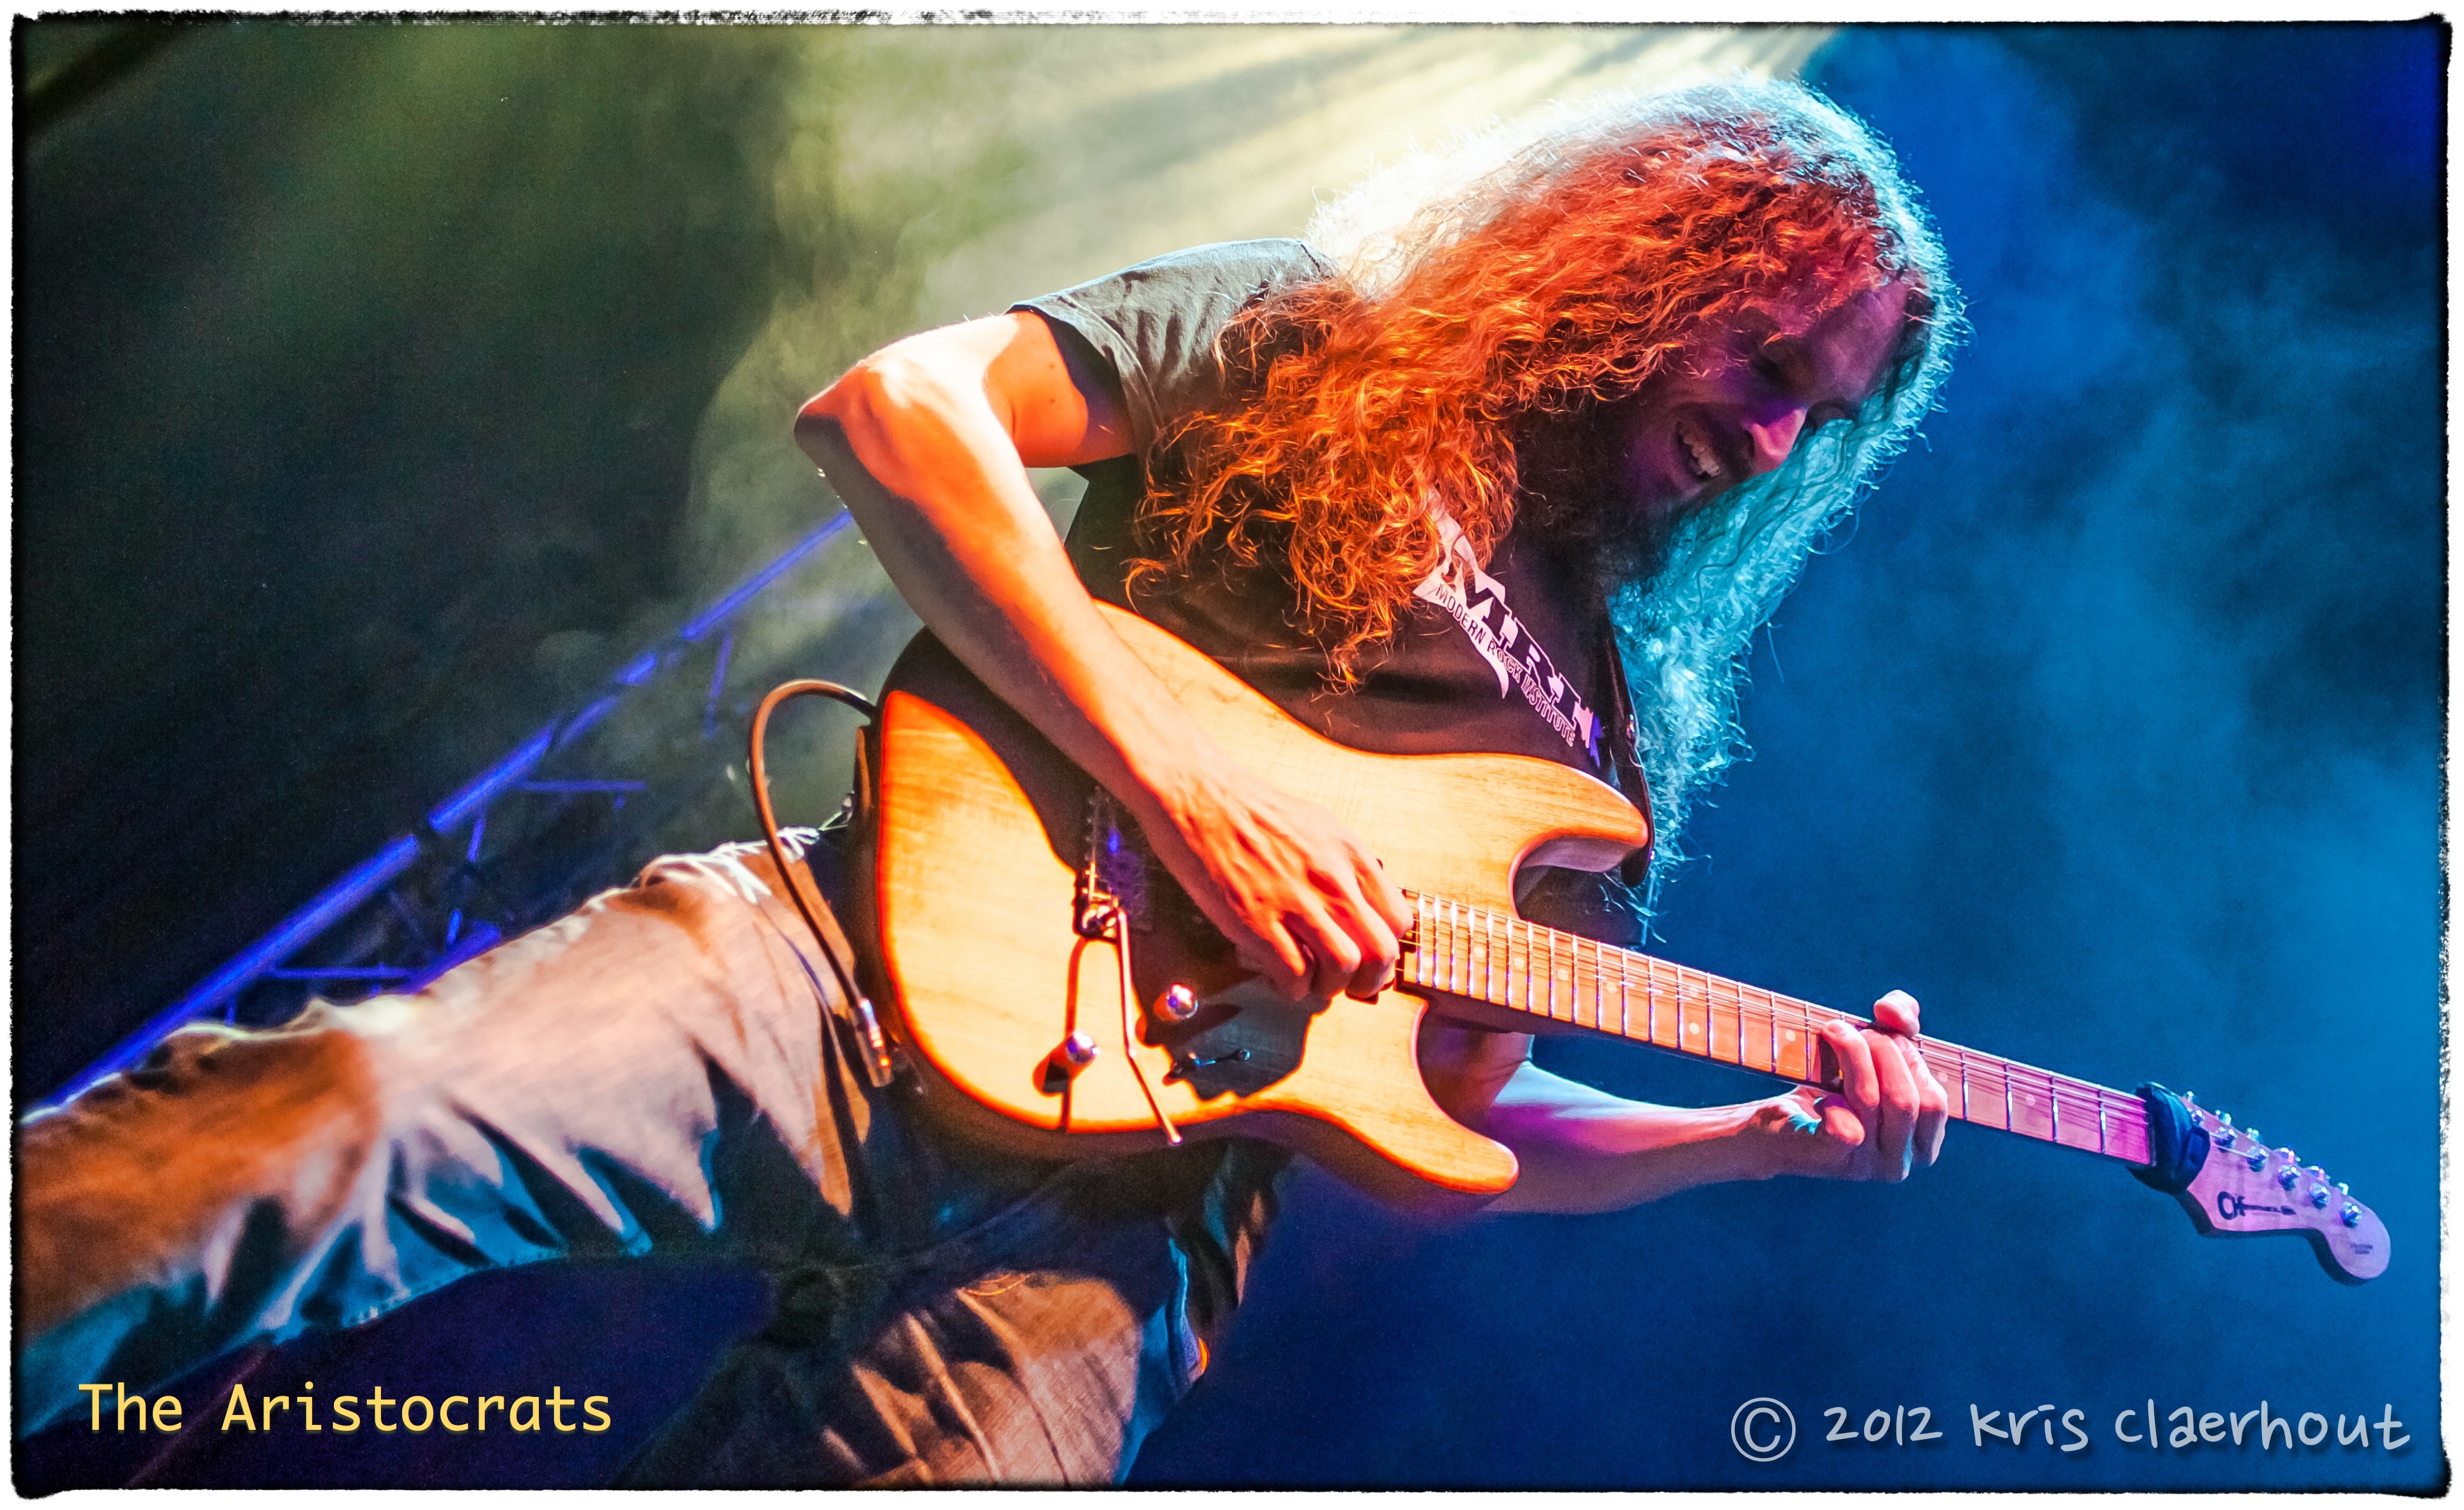 Guthrie Govan - The Aristocrats "Tres Caballeros" official publicity photo - by Mike Mesker